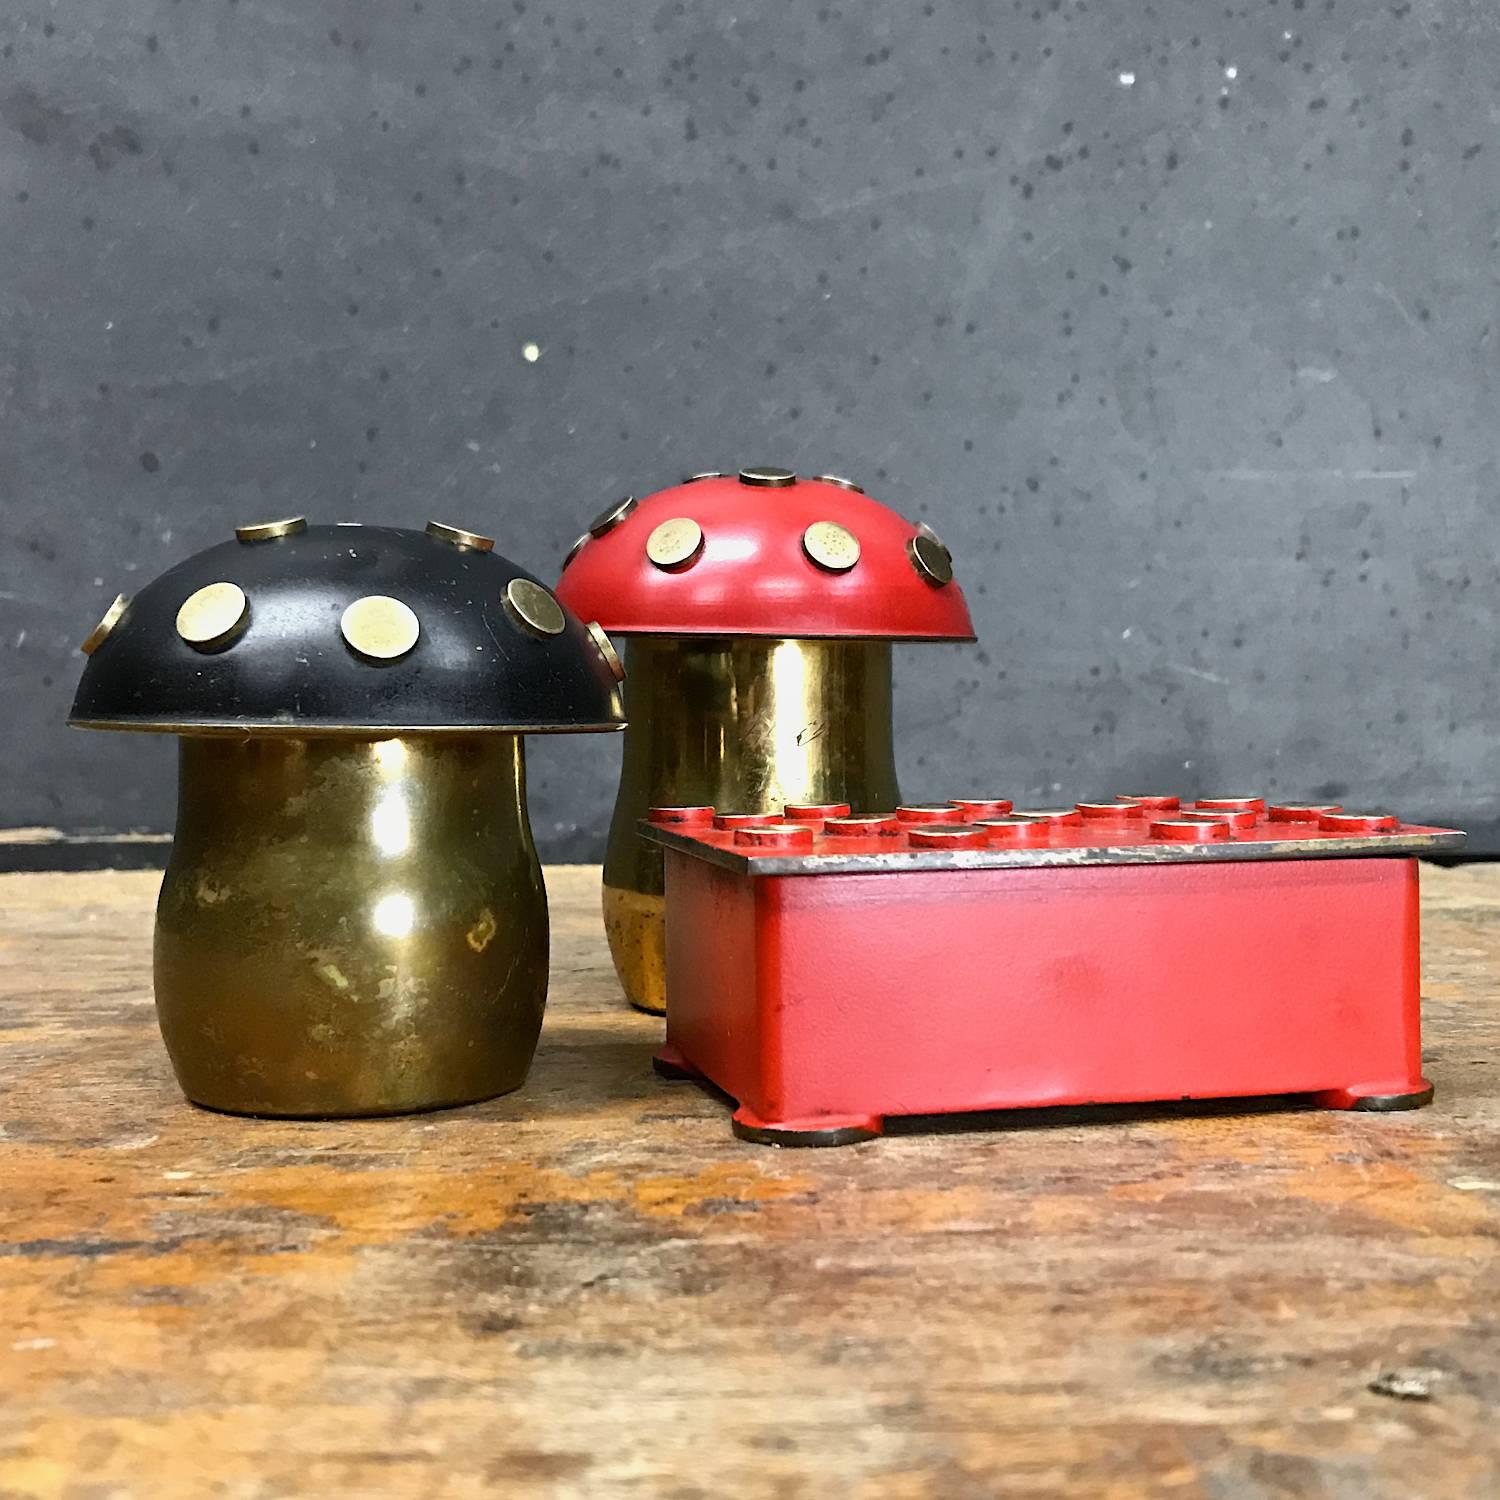 All pieces marked Austria. One mushroom has Argentor symbol, the box appears to be older and is heavier with made in Austria, and 273.

Measures: Box 4 x 3 x 1.5 in.
Blk mushroom dia: 3.25 x h: 3.25 in.
Red mushroom dia: 3.25 x h: 3.75 in.